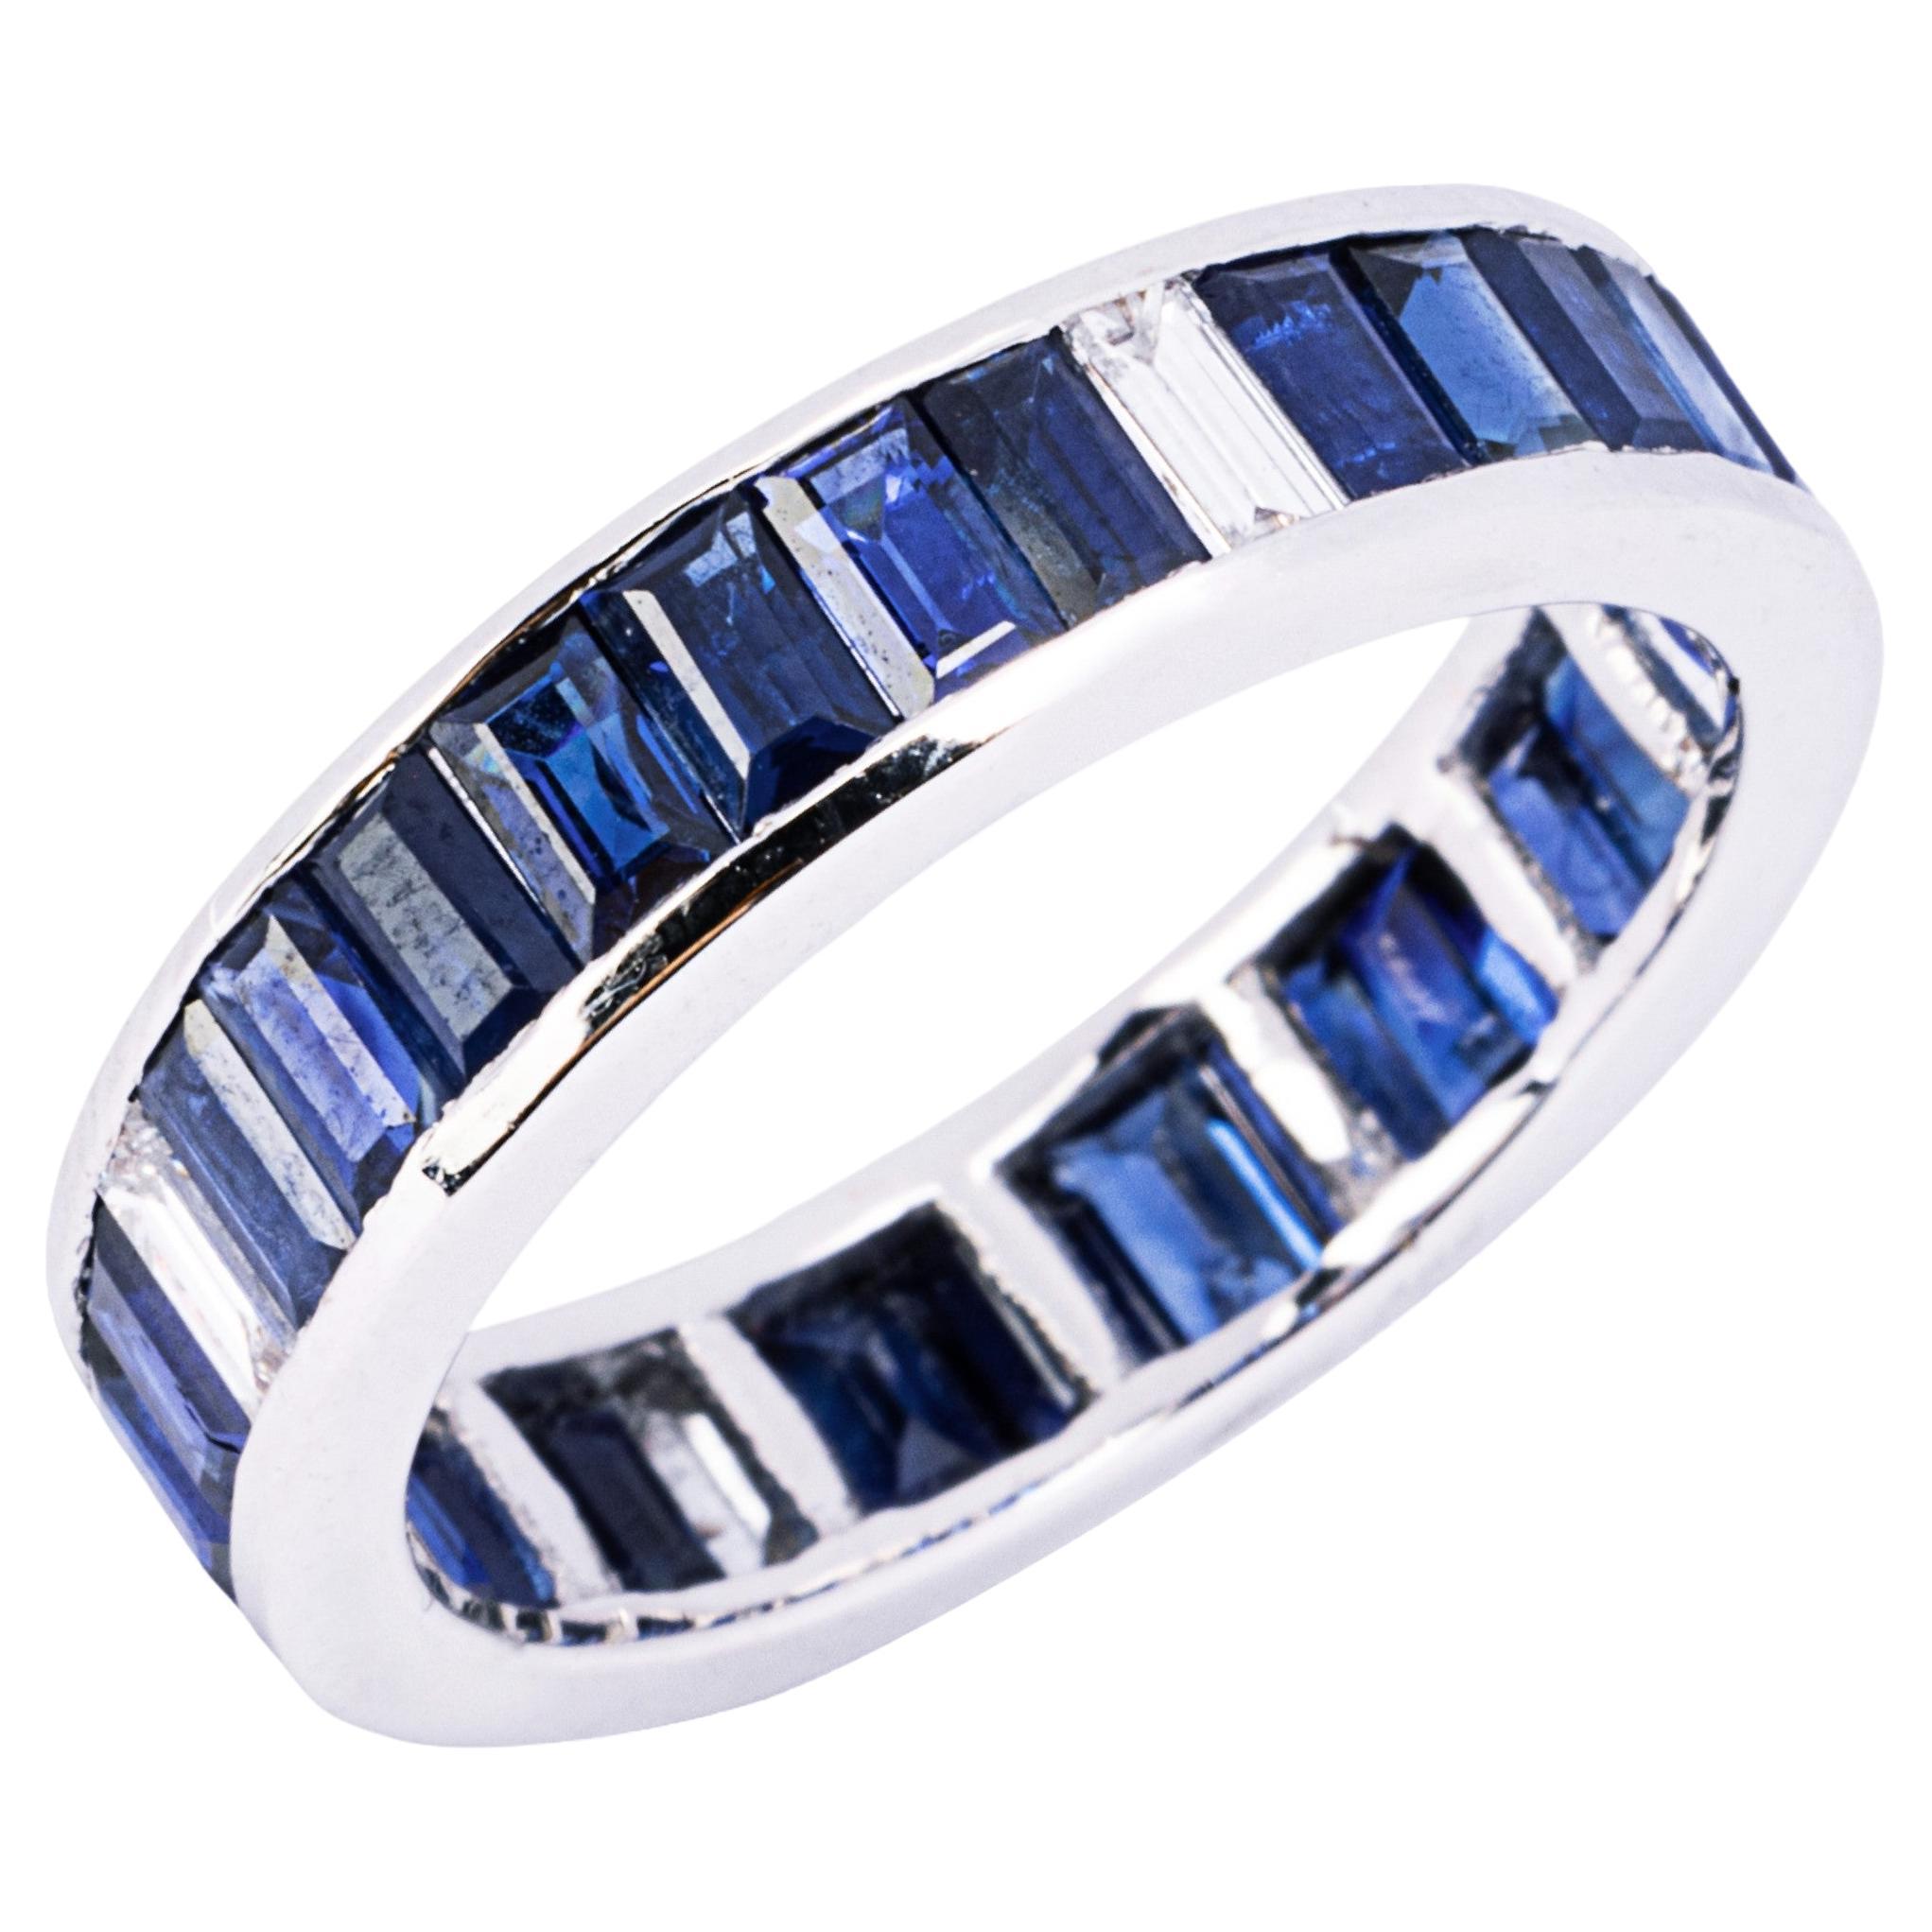 Alex Jona design collection, handmade in Italy, eternity ring in 18k white gold, with 28 baguette-cut blue sapphires weighing 3.84 carats alternating with a baguette cut white diamond, total carats of 0.26.

Alex Jona gifts stand out, not only for